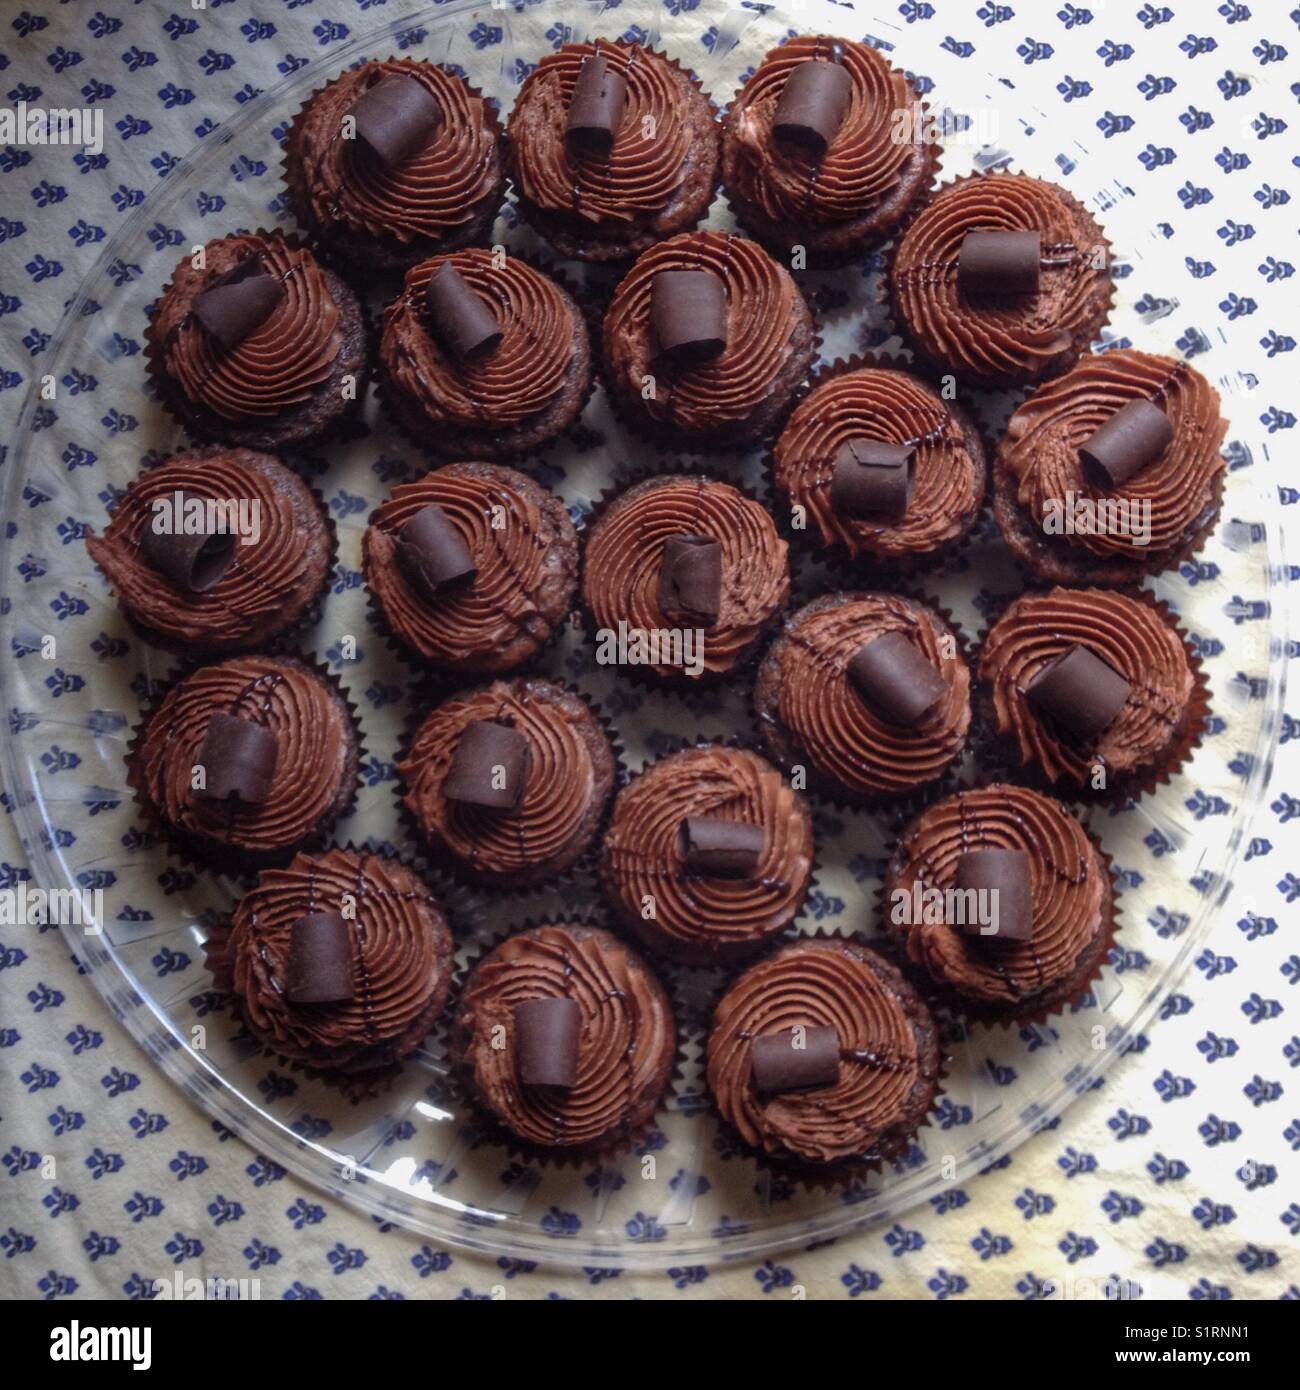 Chocolate Cupcakes on a plate. Stock Photo